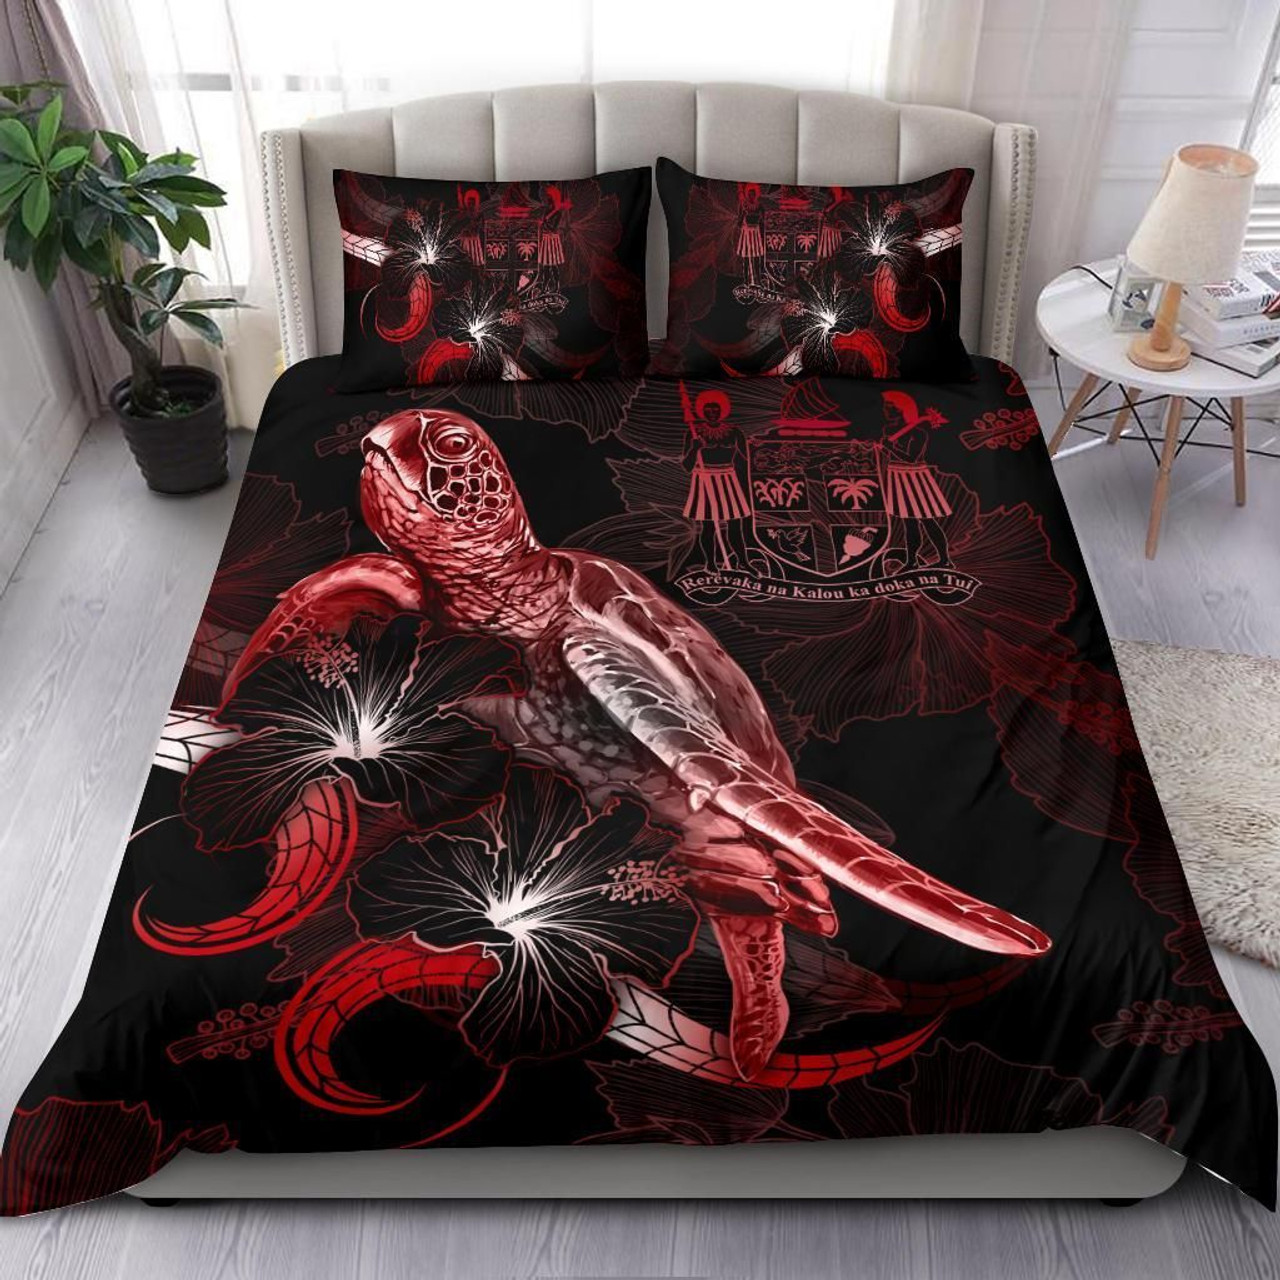 Fiji Polynesian Bedding Set - Turtle With Blooming Hibiscus Red 1